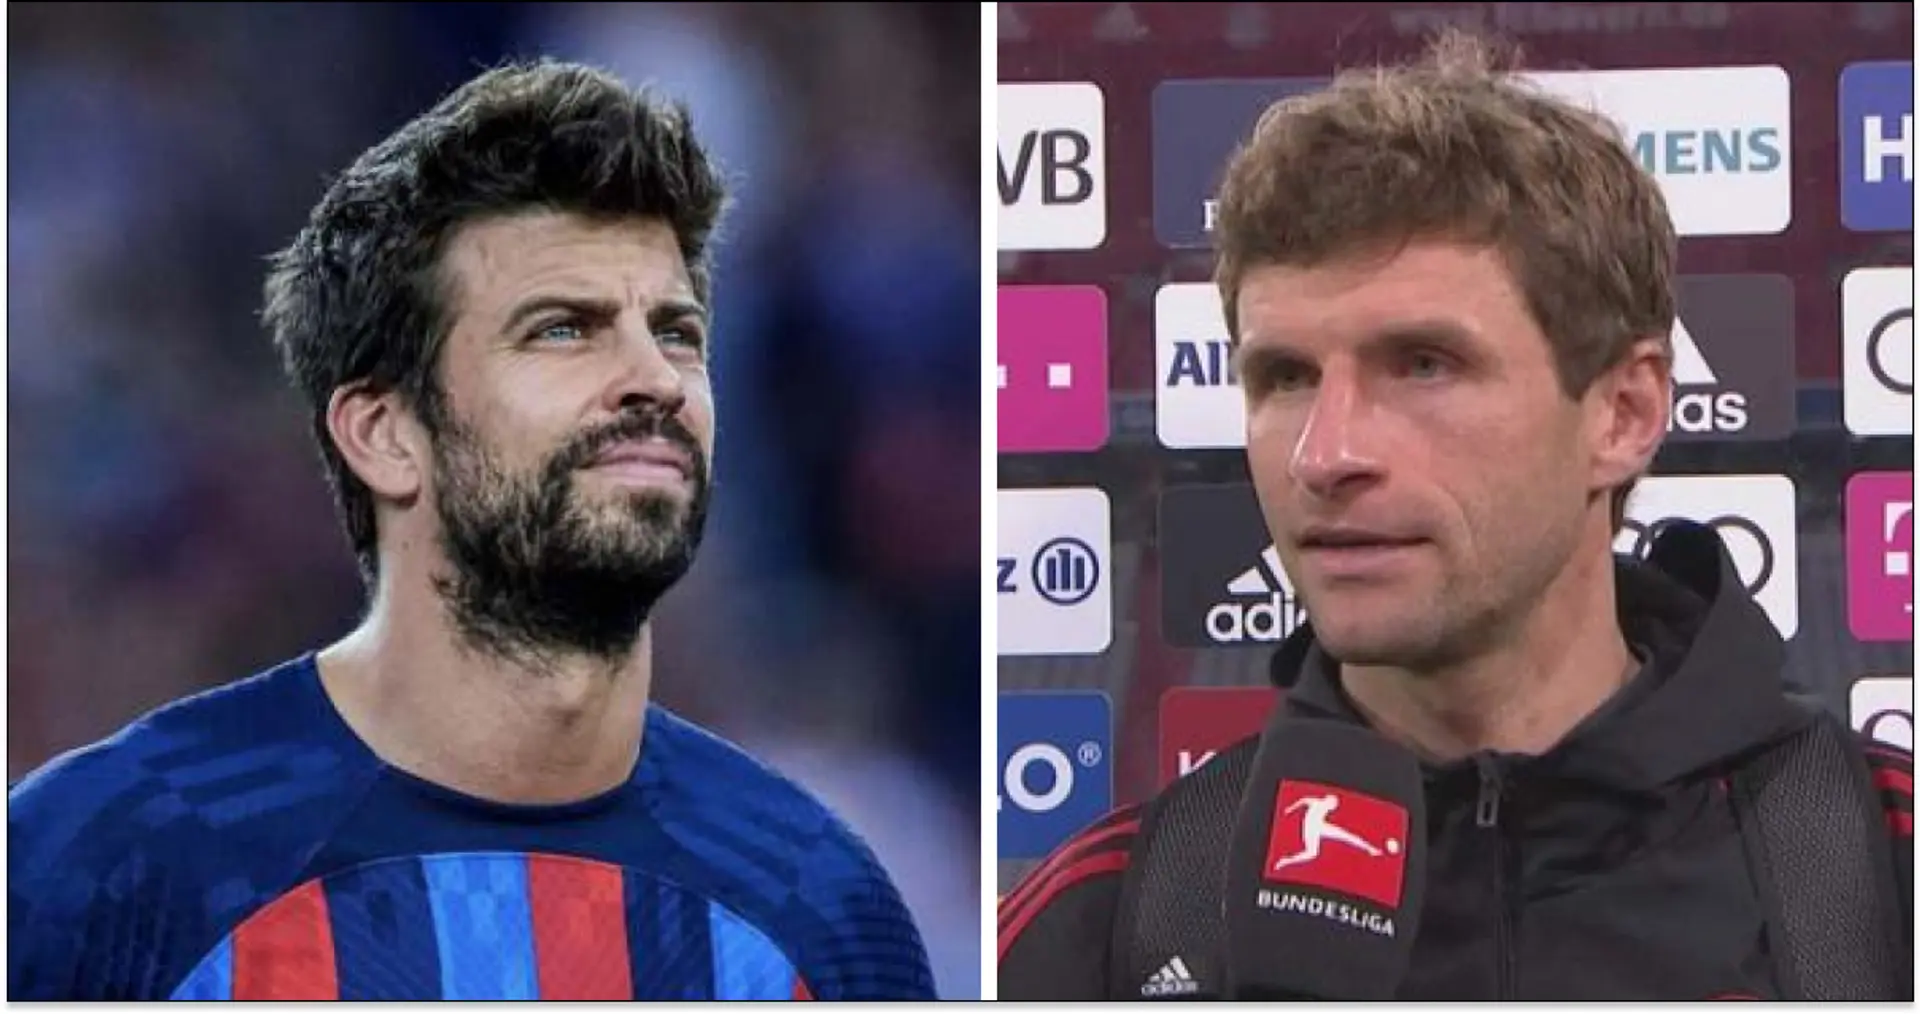 'Legend of our game': Thomas Muller reacts to Pique's retirement